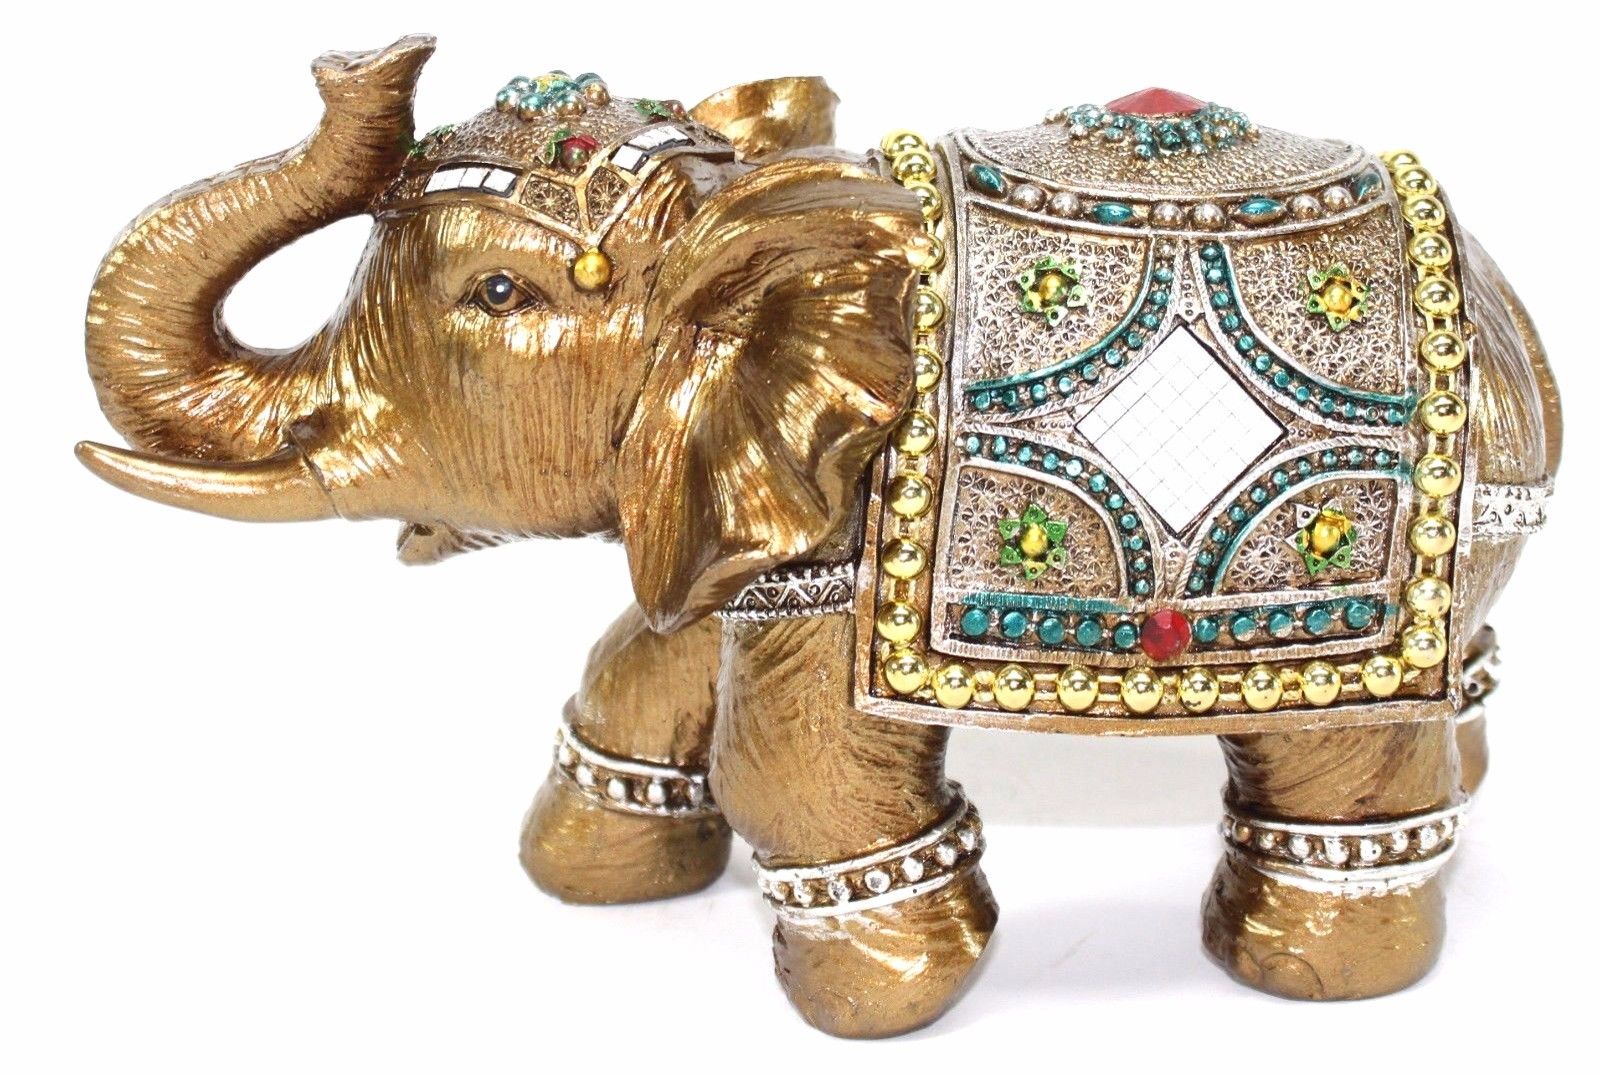 Feng Shui 7" Medium Gold Color Elegant Elephant Trunk Statue Lucky Figurine House Warming Gift & Home Decor - image 1 of 3